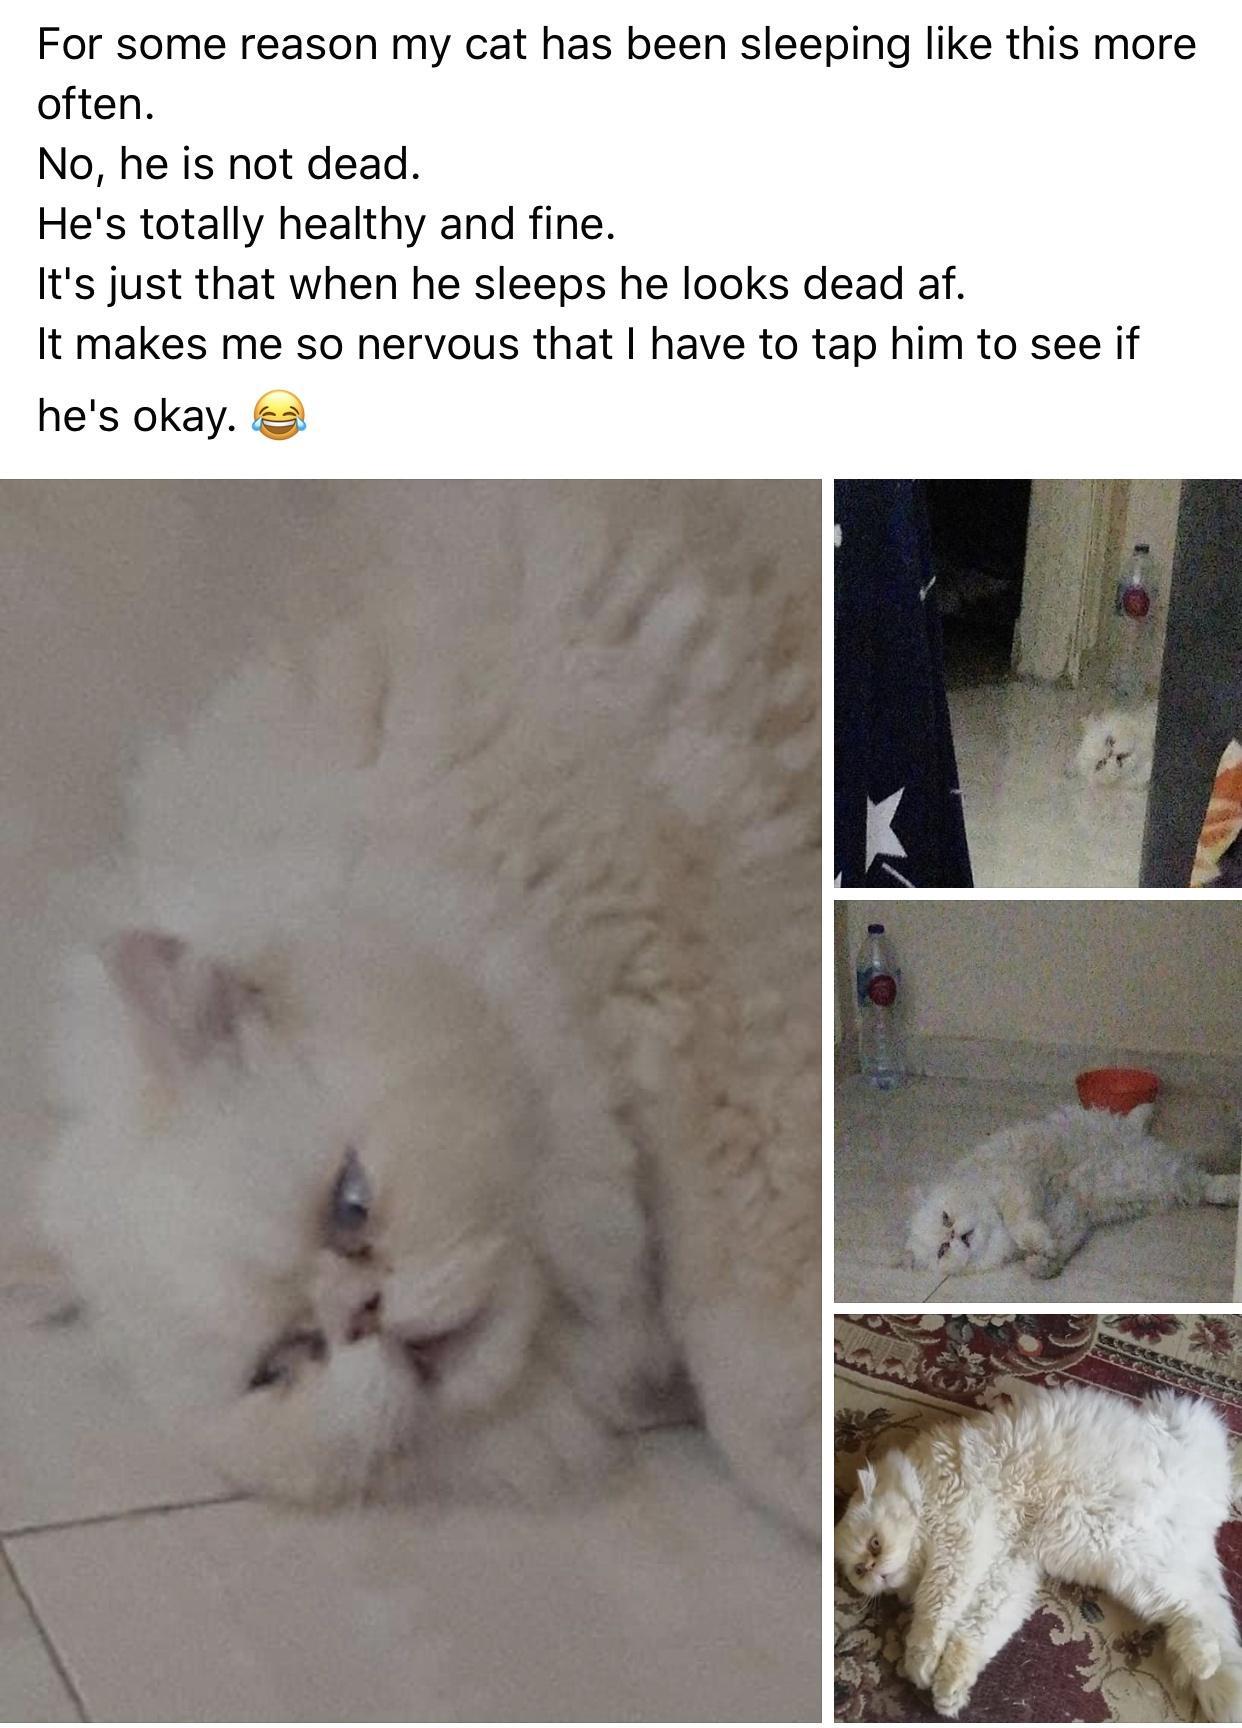 photo caption - For some reason my cat has been sleeping this more often. No, he is not dead. He's totally healthy and fine. It's just that when he sleeps he looks dead af. It makes me so nervous that I have to tap him to see if he's okay.